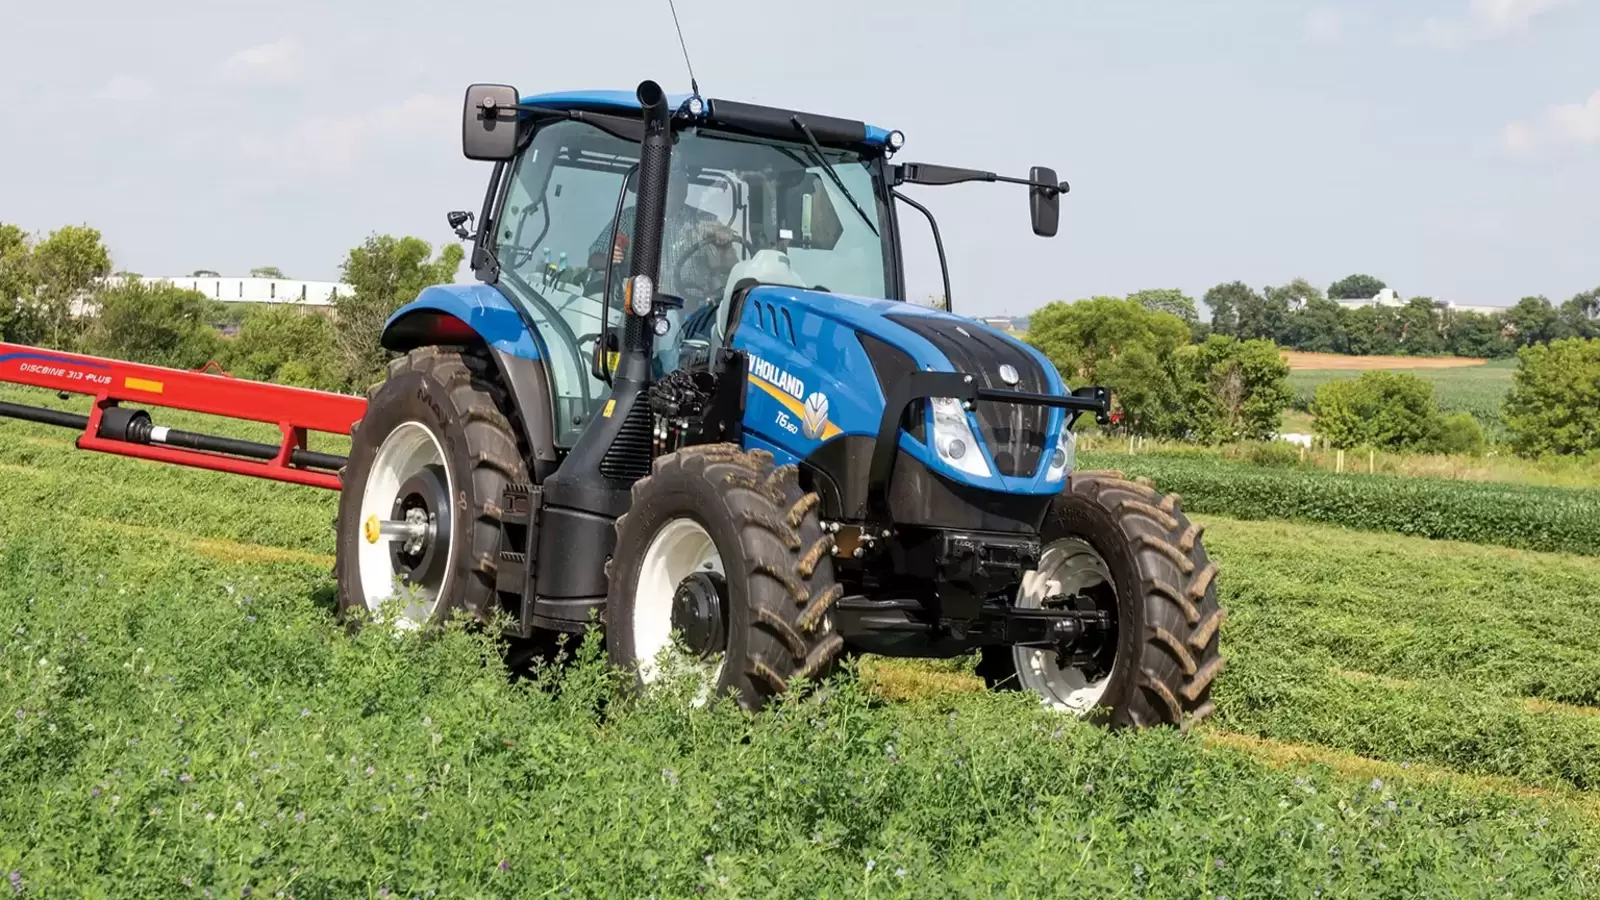 Sustainability 2.0: This tractor is powered by cow dung, belts out 180 hp